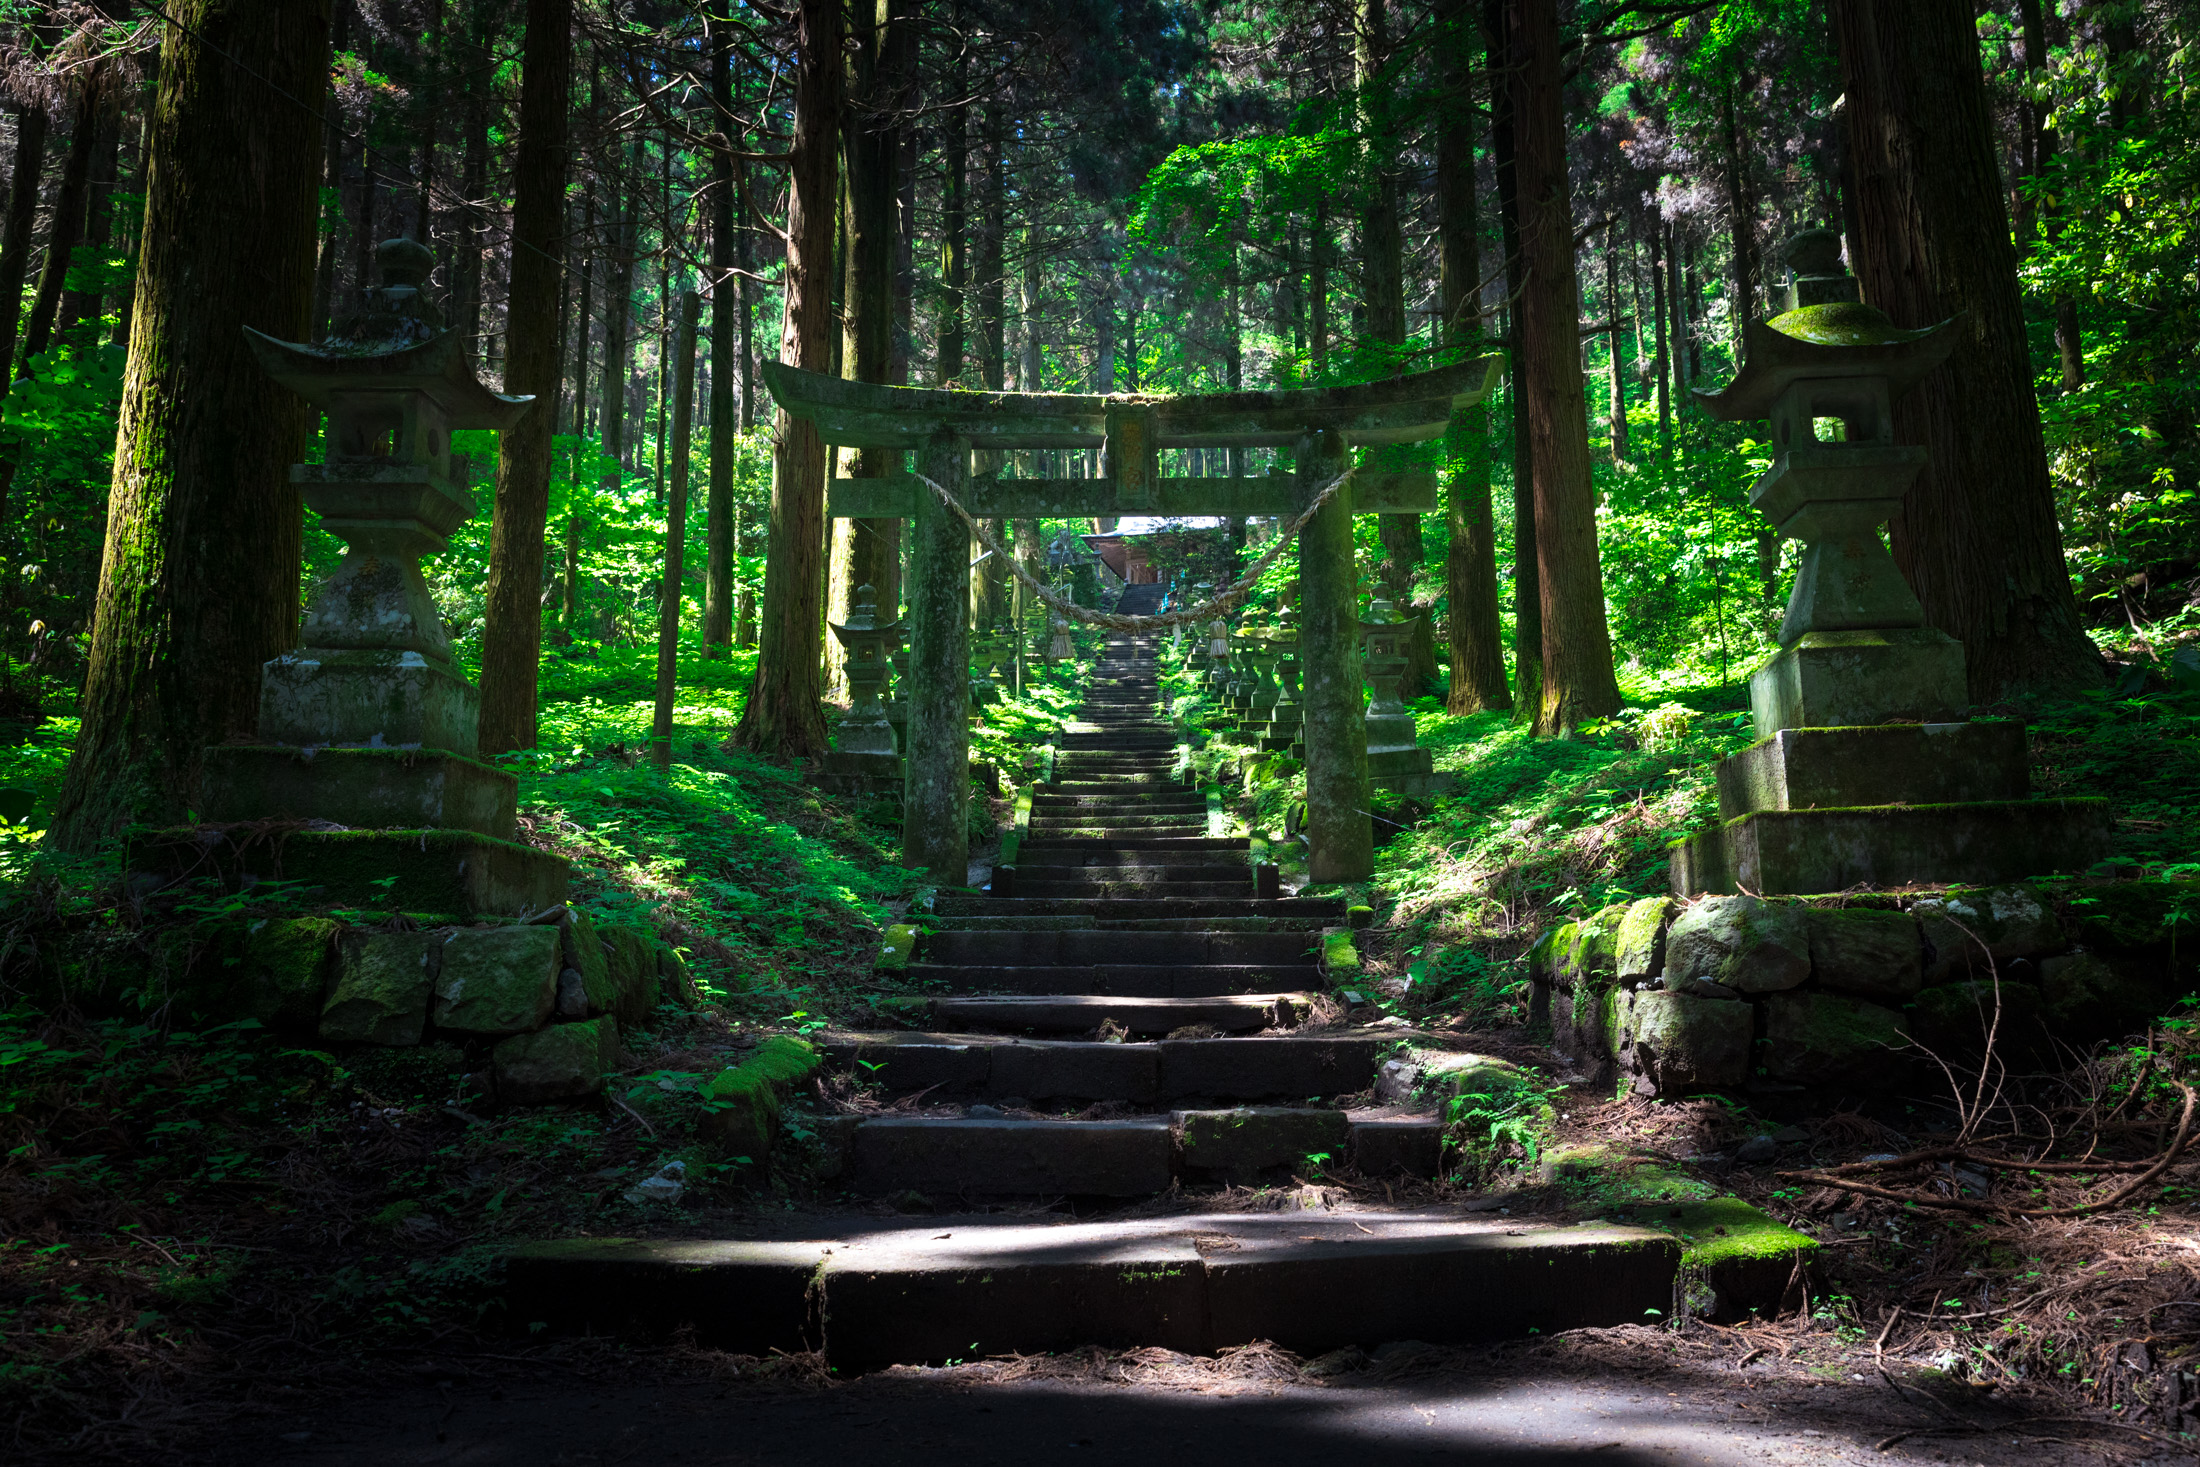 Tranquil Shinto shrine nestled in lush forest with stone steps and wooden torii gate.